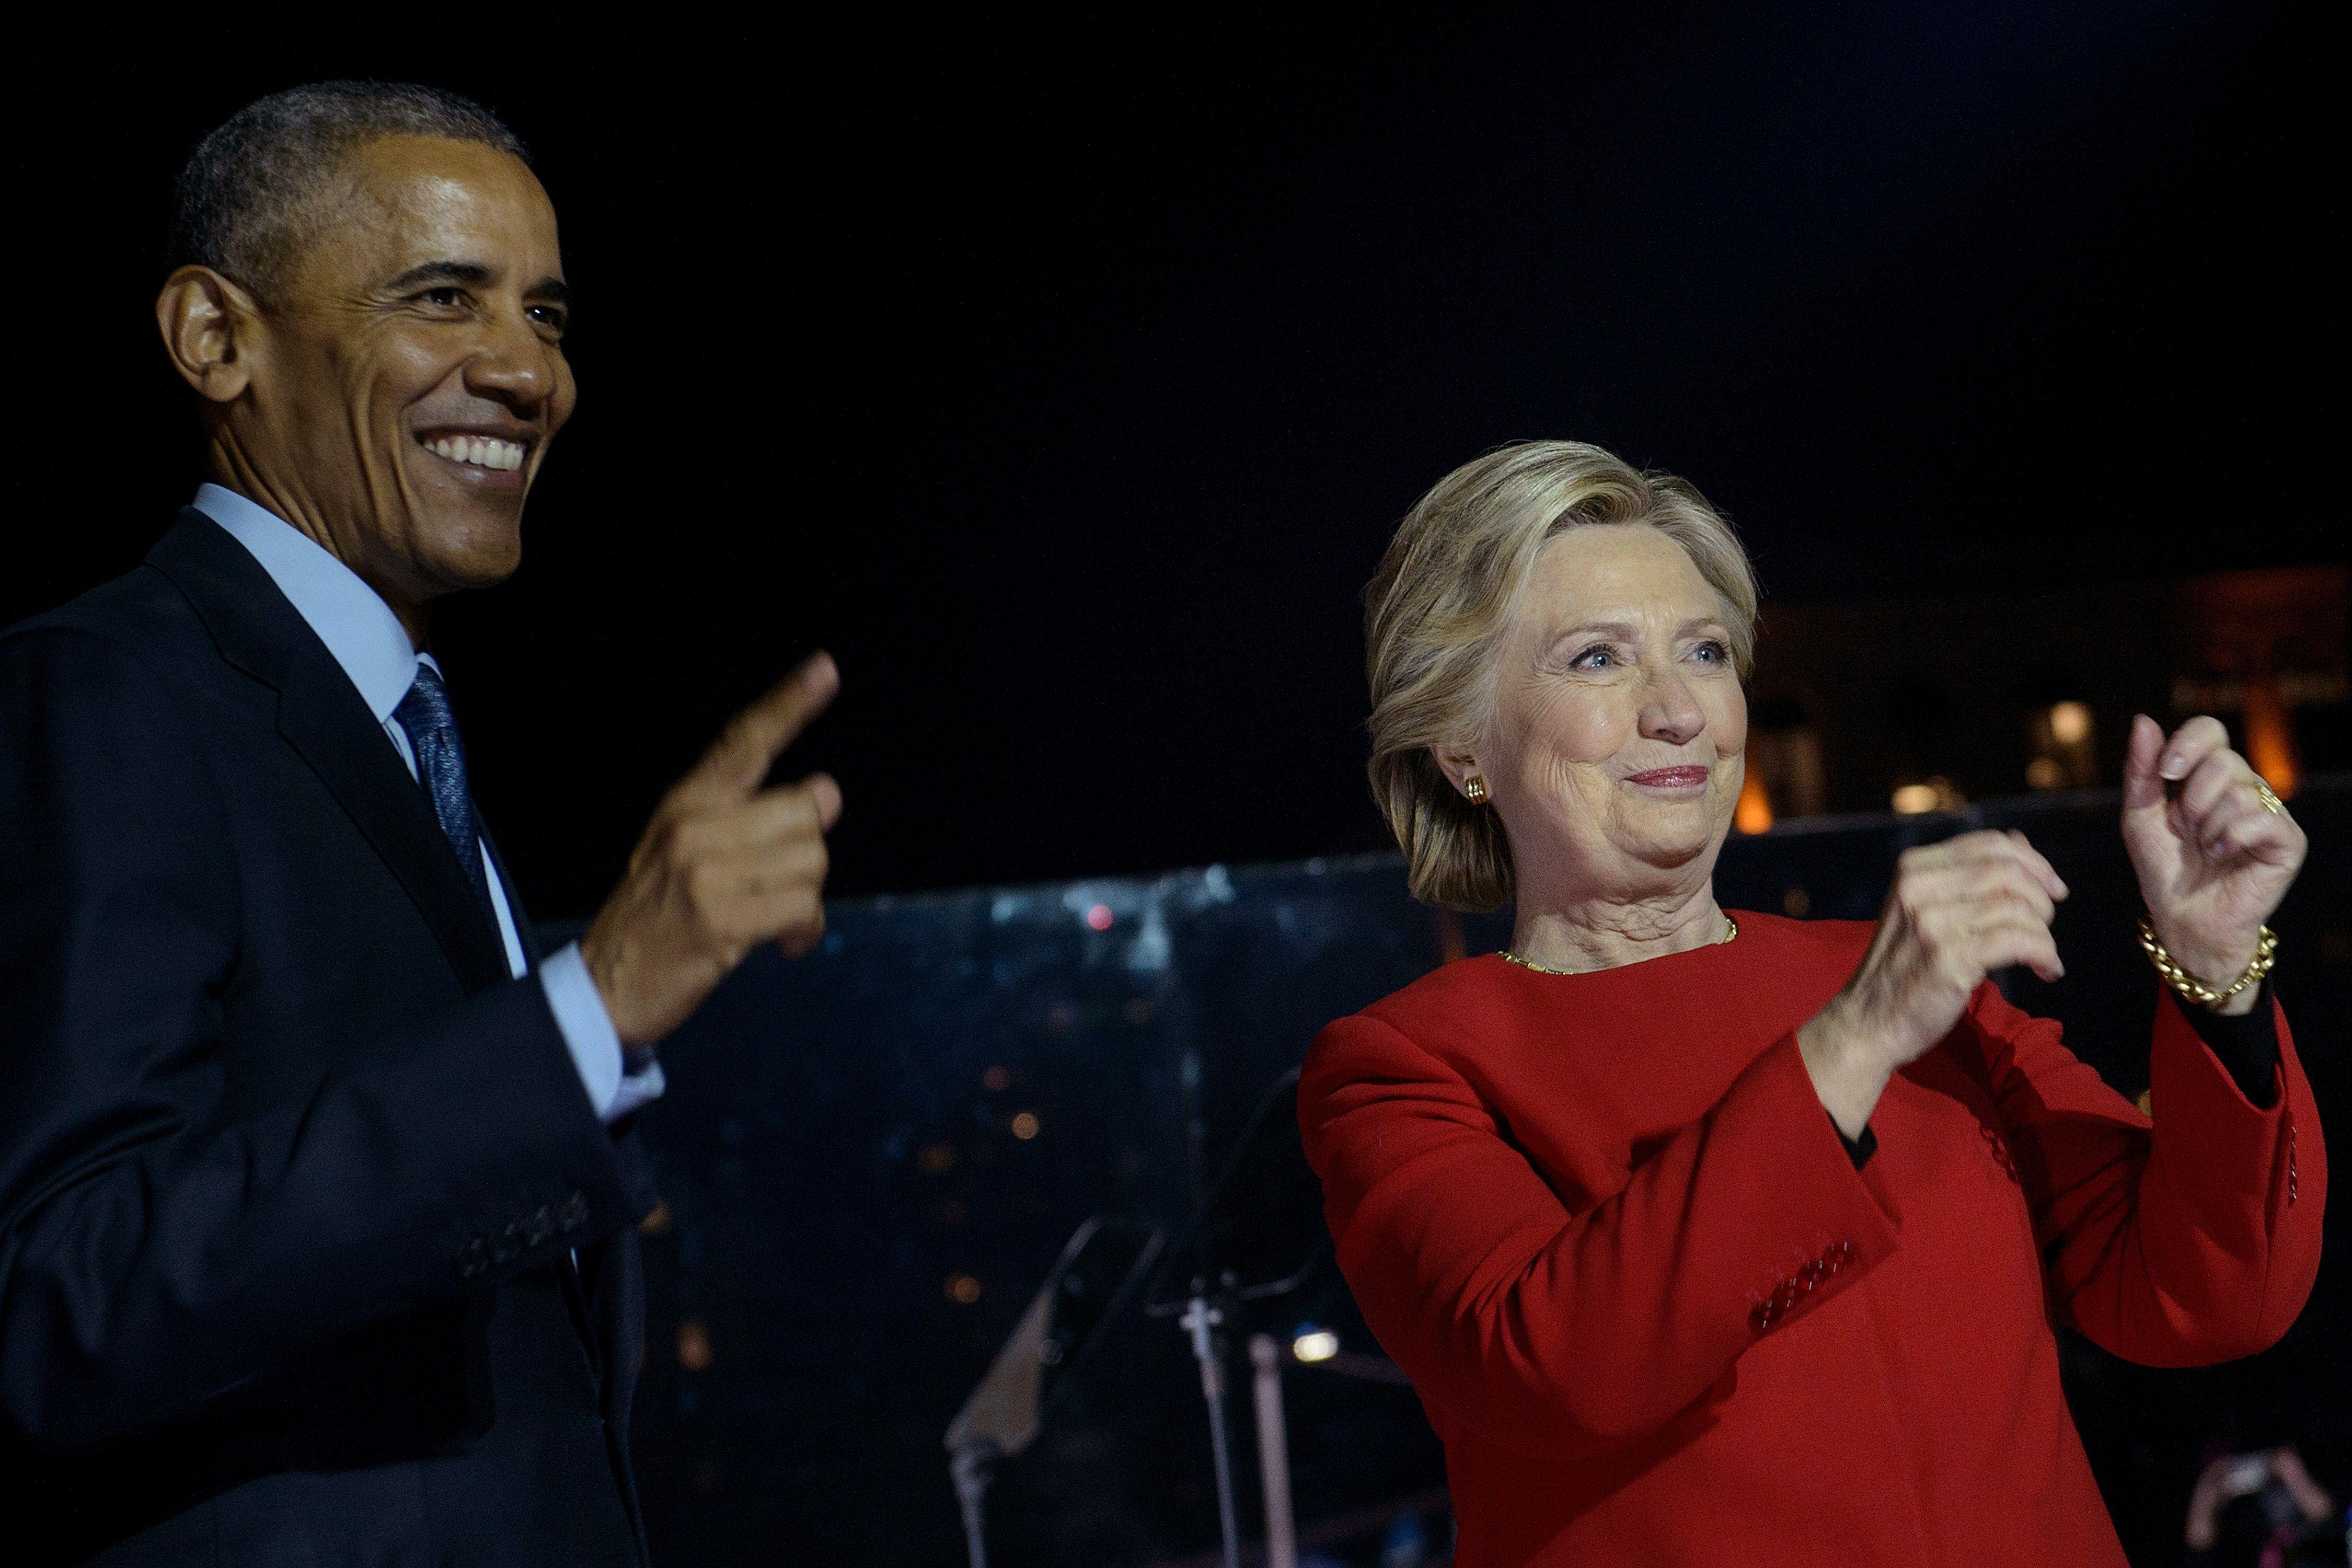 On a campaign rally stage, Obama smiles and points to the crowd while Hillary Clinton gestures with her hands.